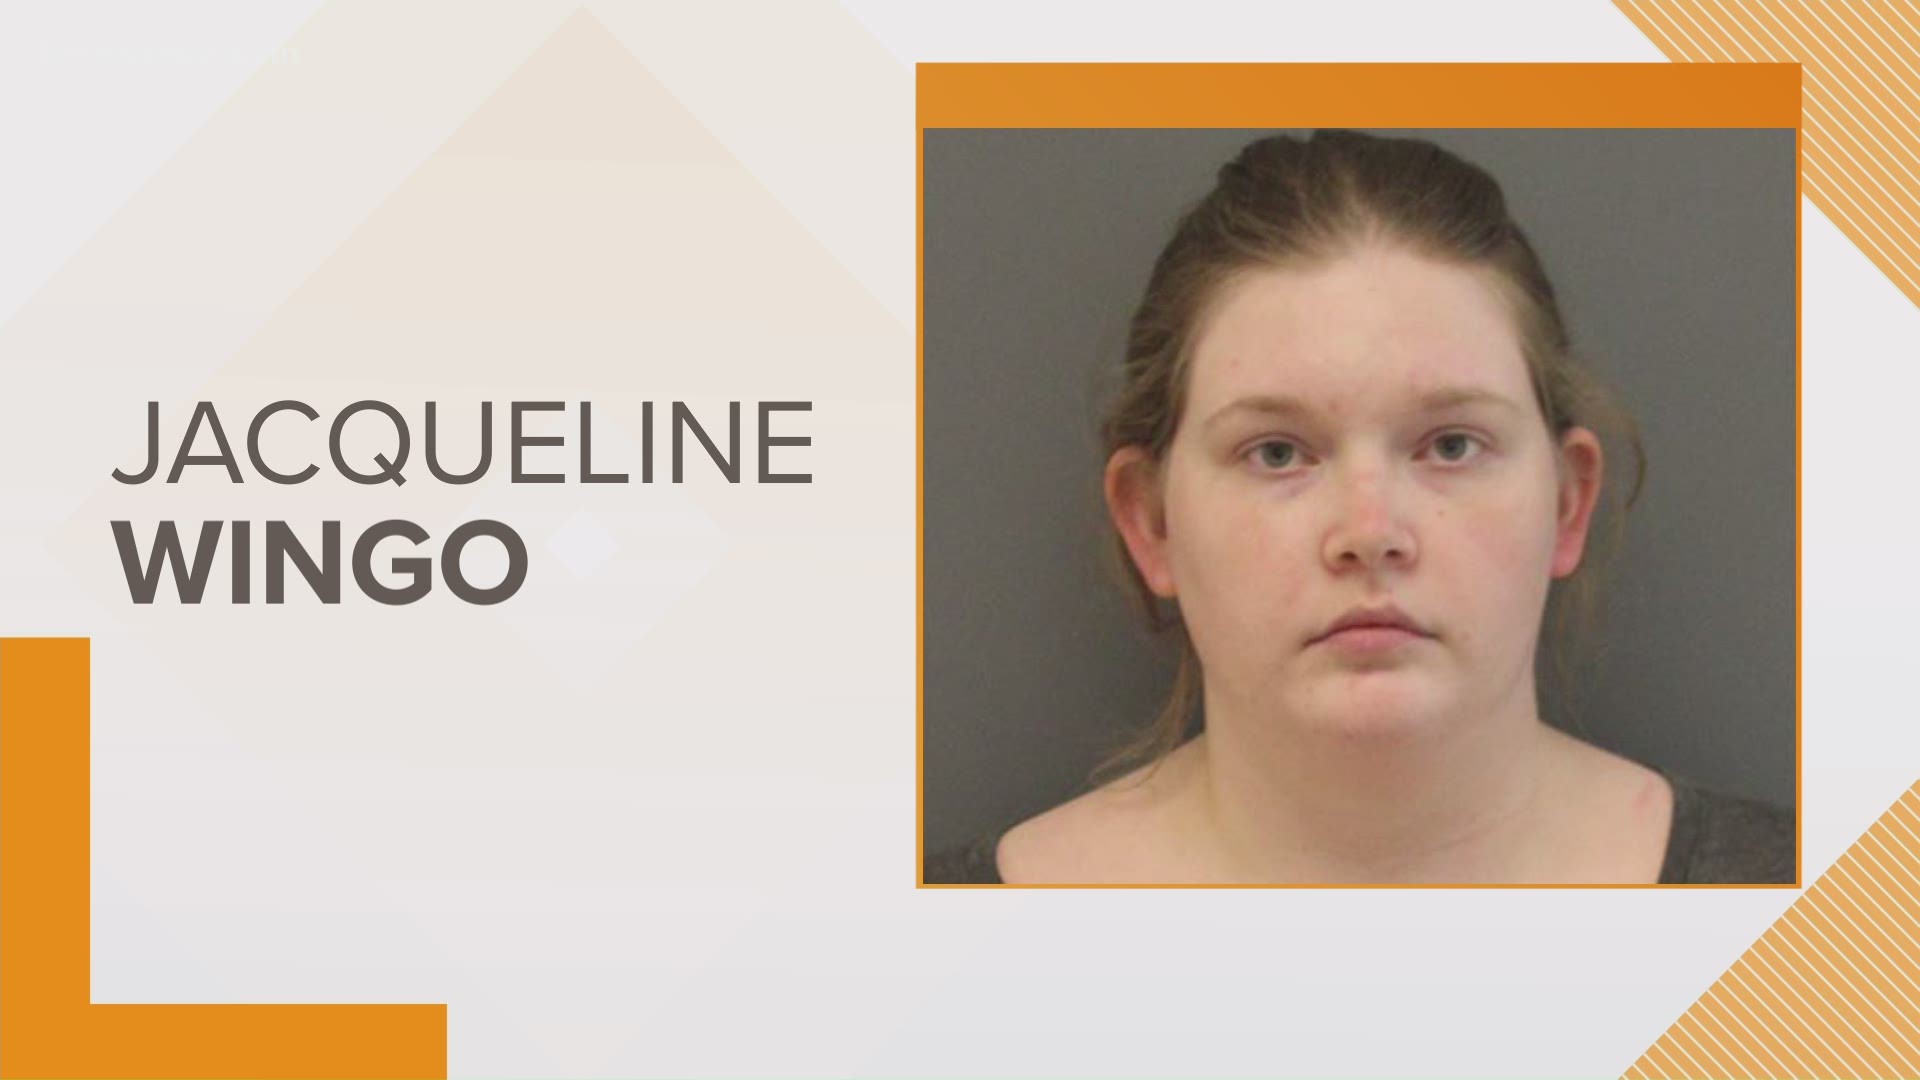 Police said the girl and her 5-year-old sister were malnourished. Their mother, Jacqueline Wingo, was charged with Involuntary Manslaughter and Child Abuse/Neglect.